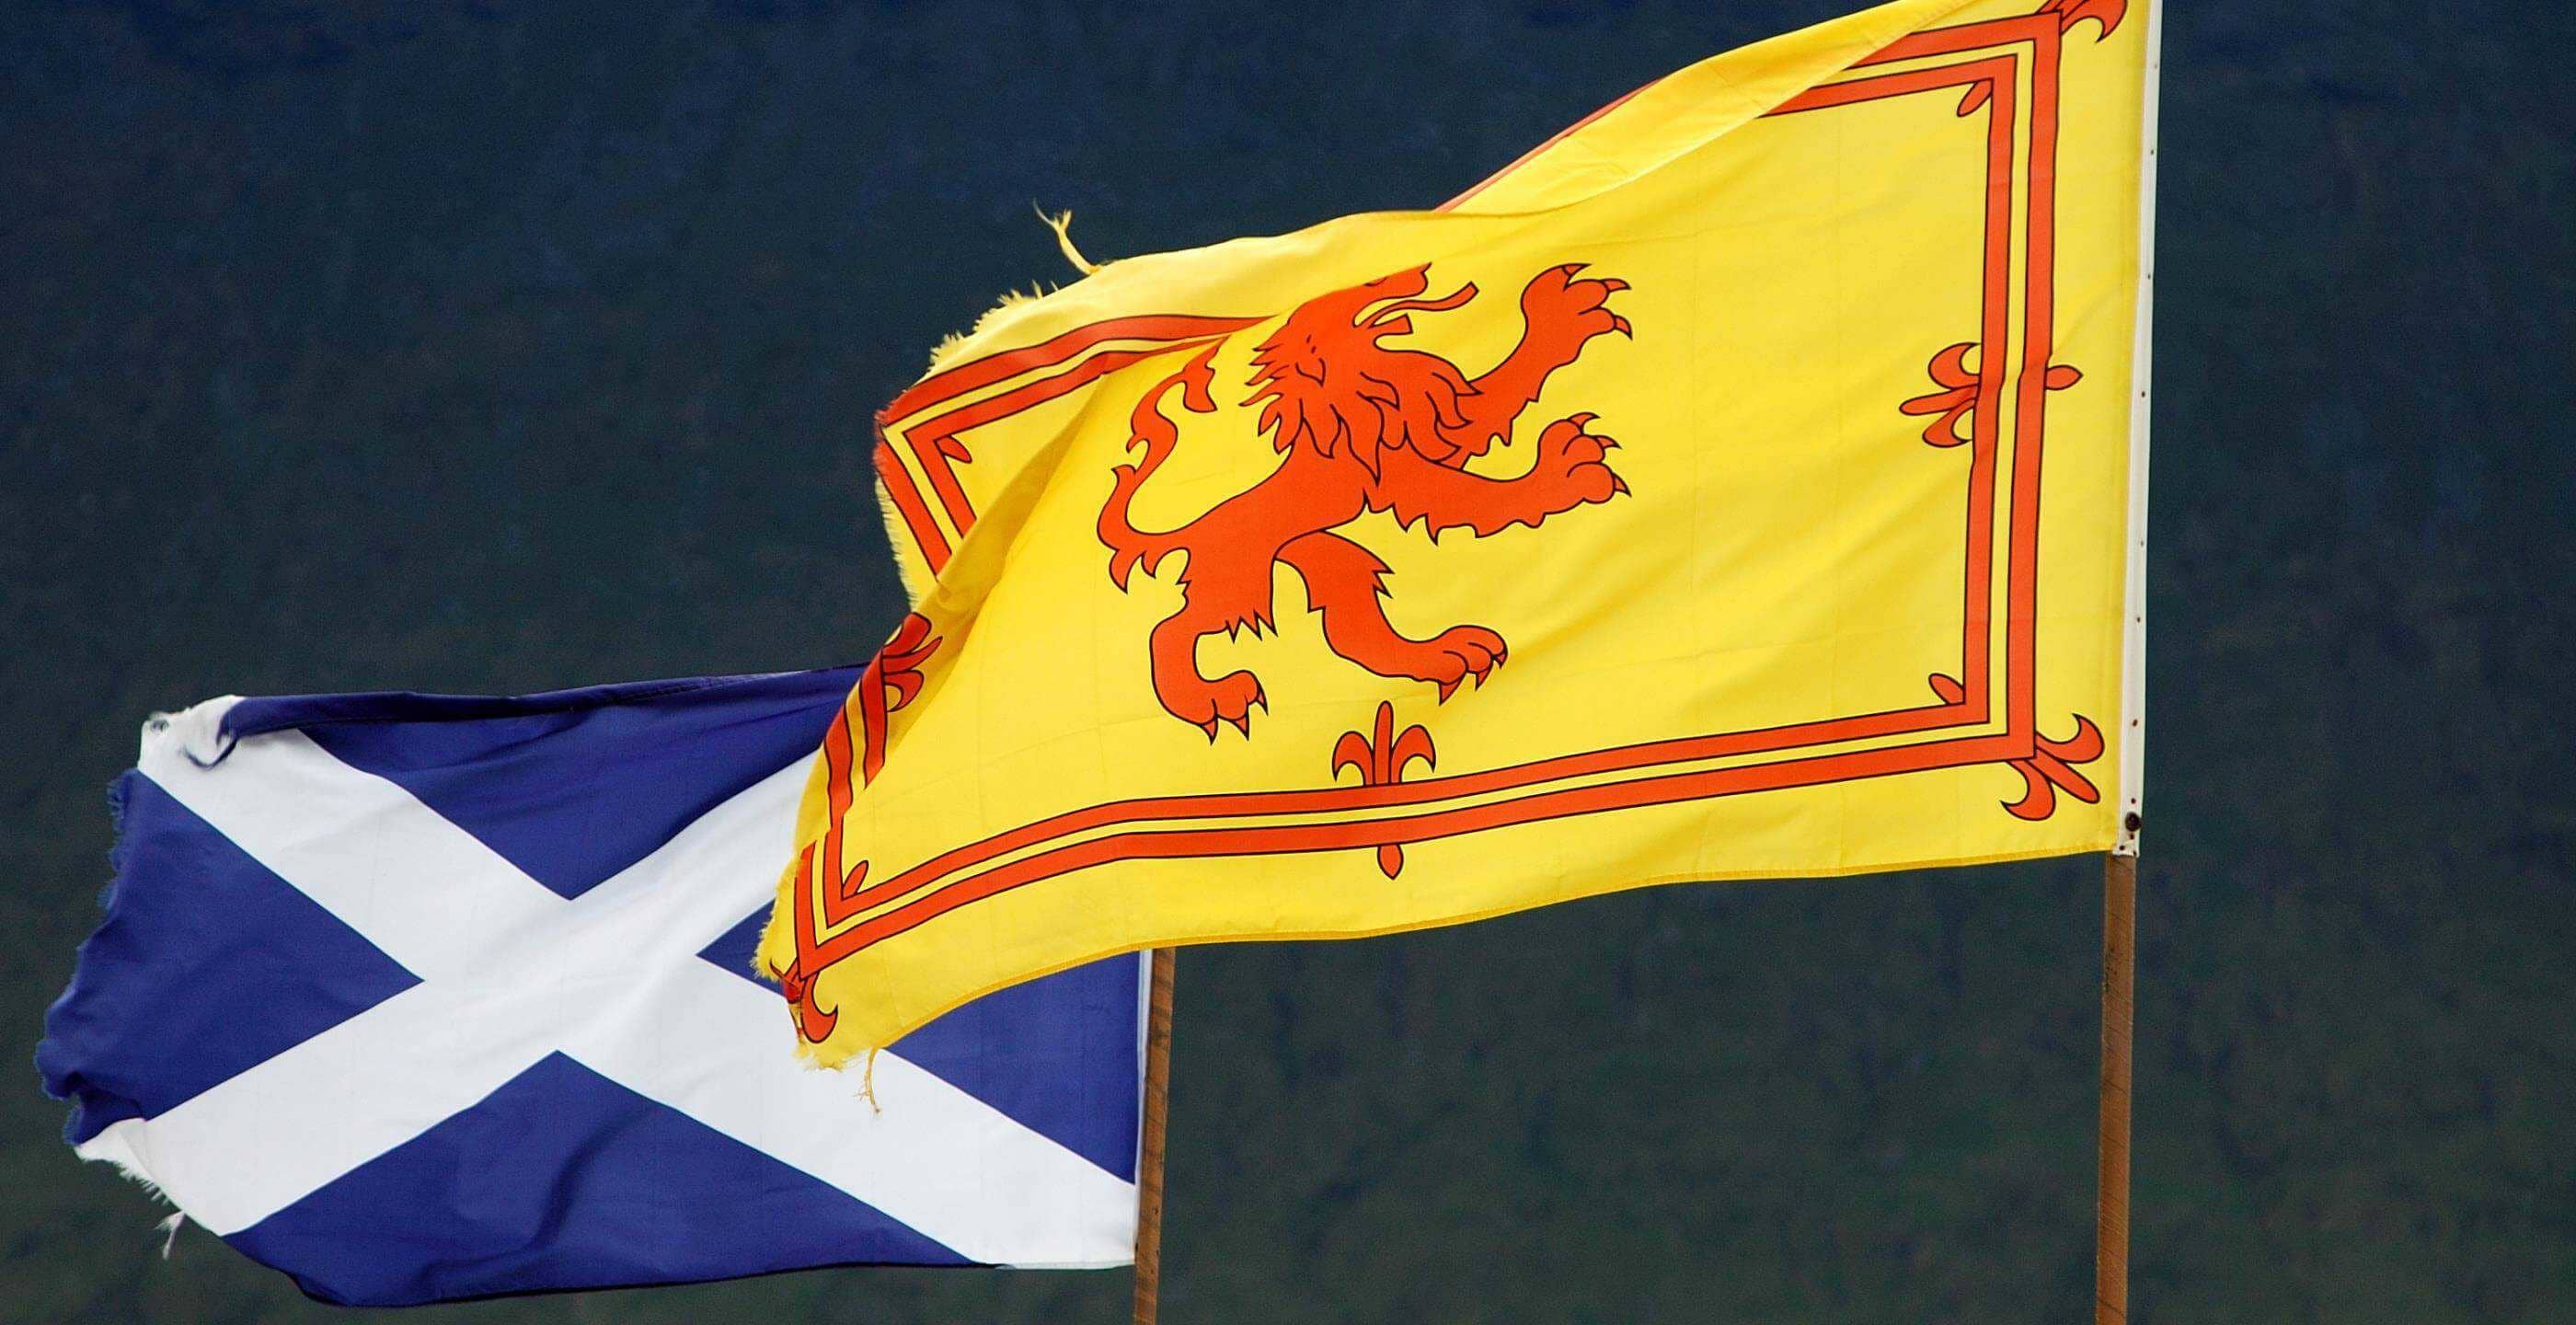 The flags of scotland